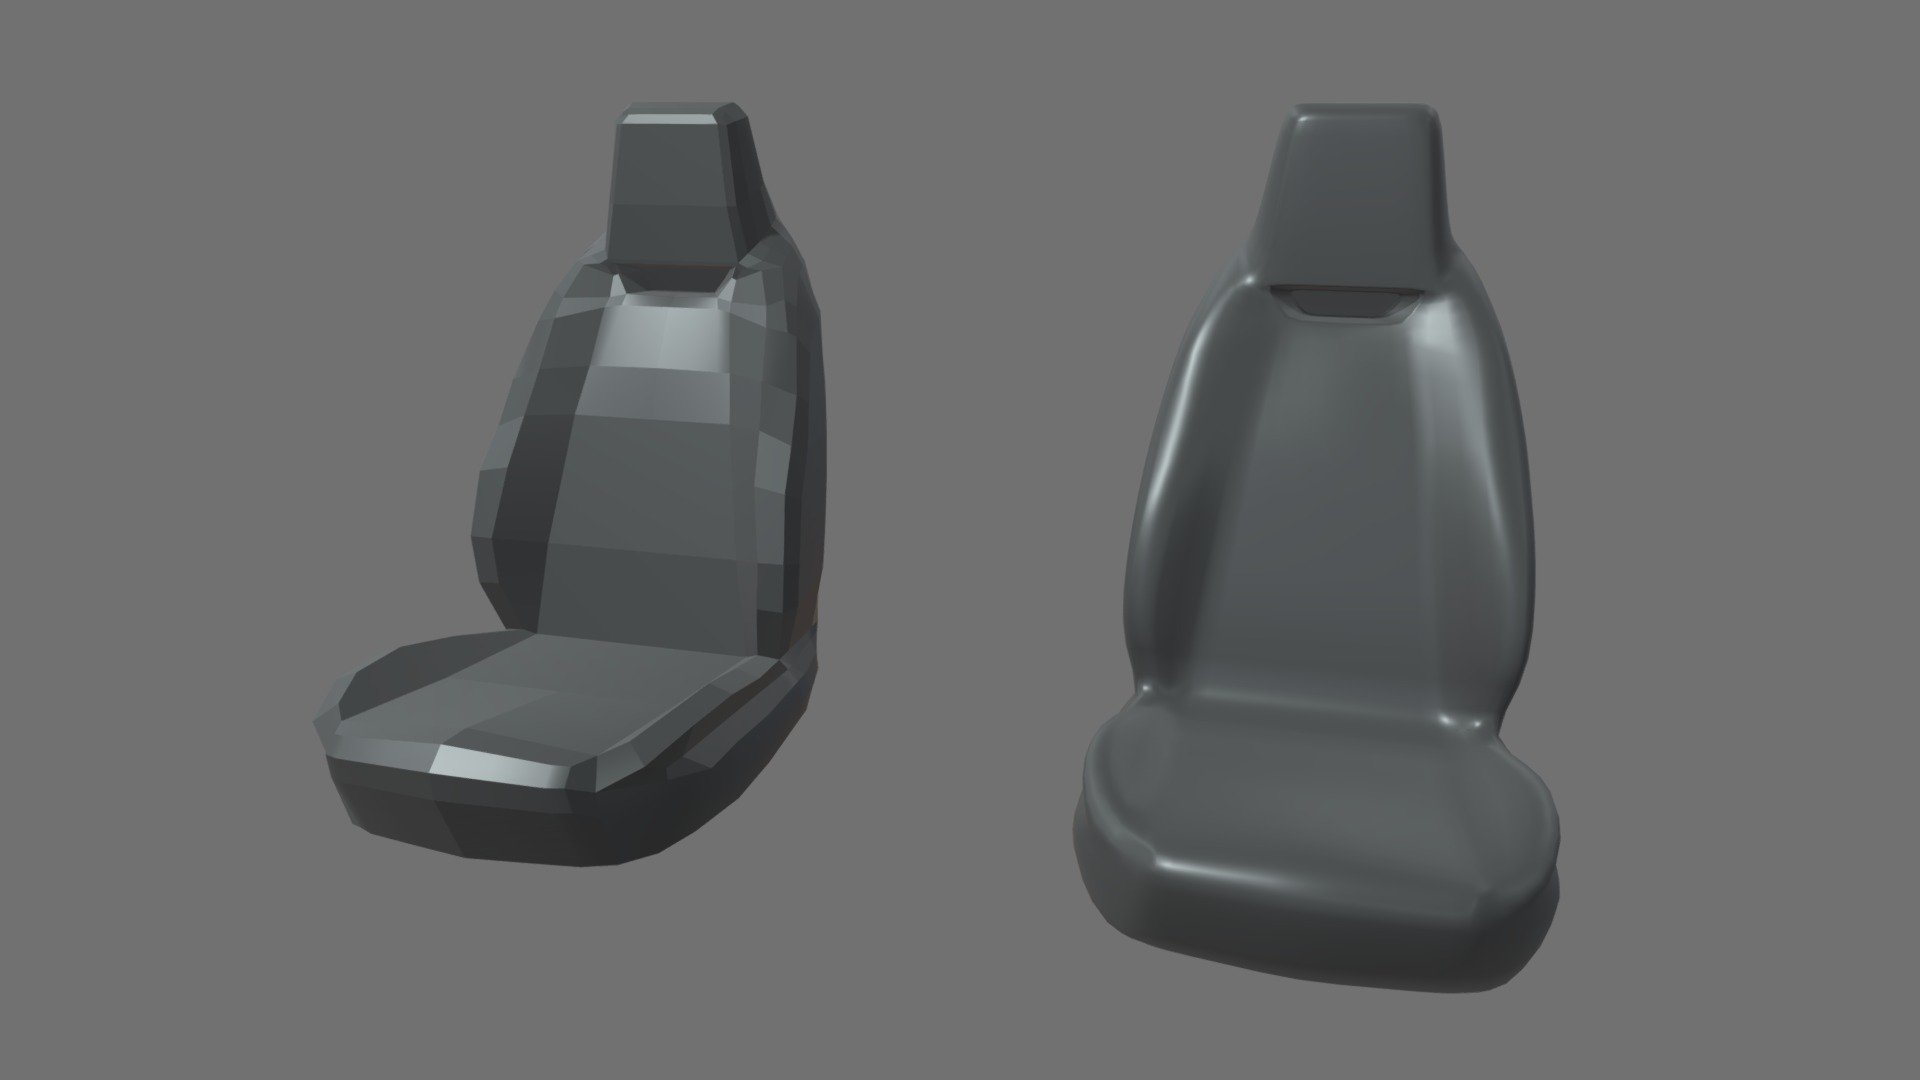 This model contains a Car Seat 017 based on a real stylized car seat from a standard car which i modeled in Maya 2018. This model is perfect to create a new great scene with different car pieces or part of a car model. I got a lot of different Car Seats and Car Parts on my profile.

The model is ready as one unique part and ready for being a great CGI model and also a 3D printable model, i will add the STL model, tested for 3D printing in Ultimaker Cura. I uploaded the model in .mb, ,blend, .stl, .obj and .fbx. If you need any other file tell me.

This model contais a low poly version and a higher poly version. Both of them uploaded.

If you need any kind of help contact me, i will help you with everything i can. If you like the model please give me some feedback, I would appreciate it.

Don't doubt on contacting me, i would be very happy to help. If you experience any kind of difficulties, be sure to contact me and i will help you. Sincerely Yours, ViperJr3D - Car Seat 017 - Buy Royalty Free 3D model by ViperJr3D 3d model